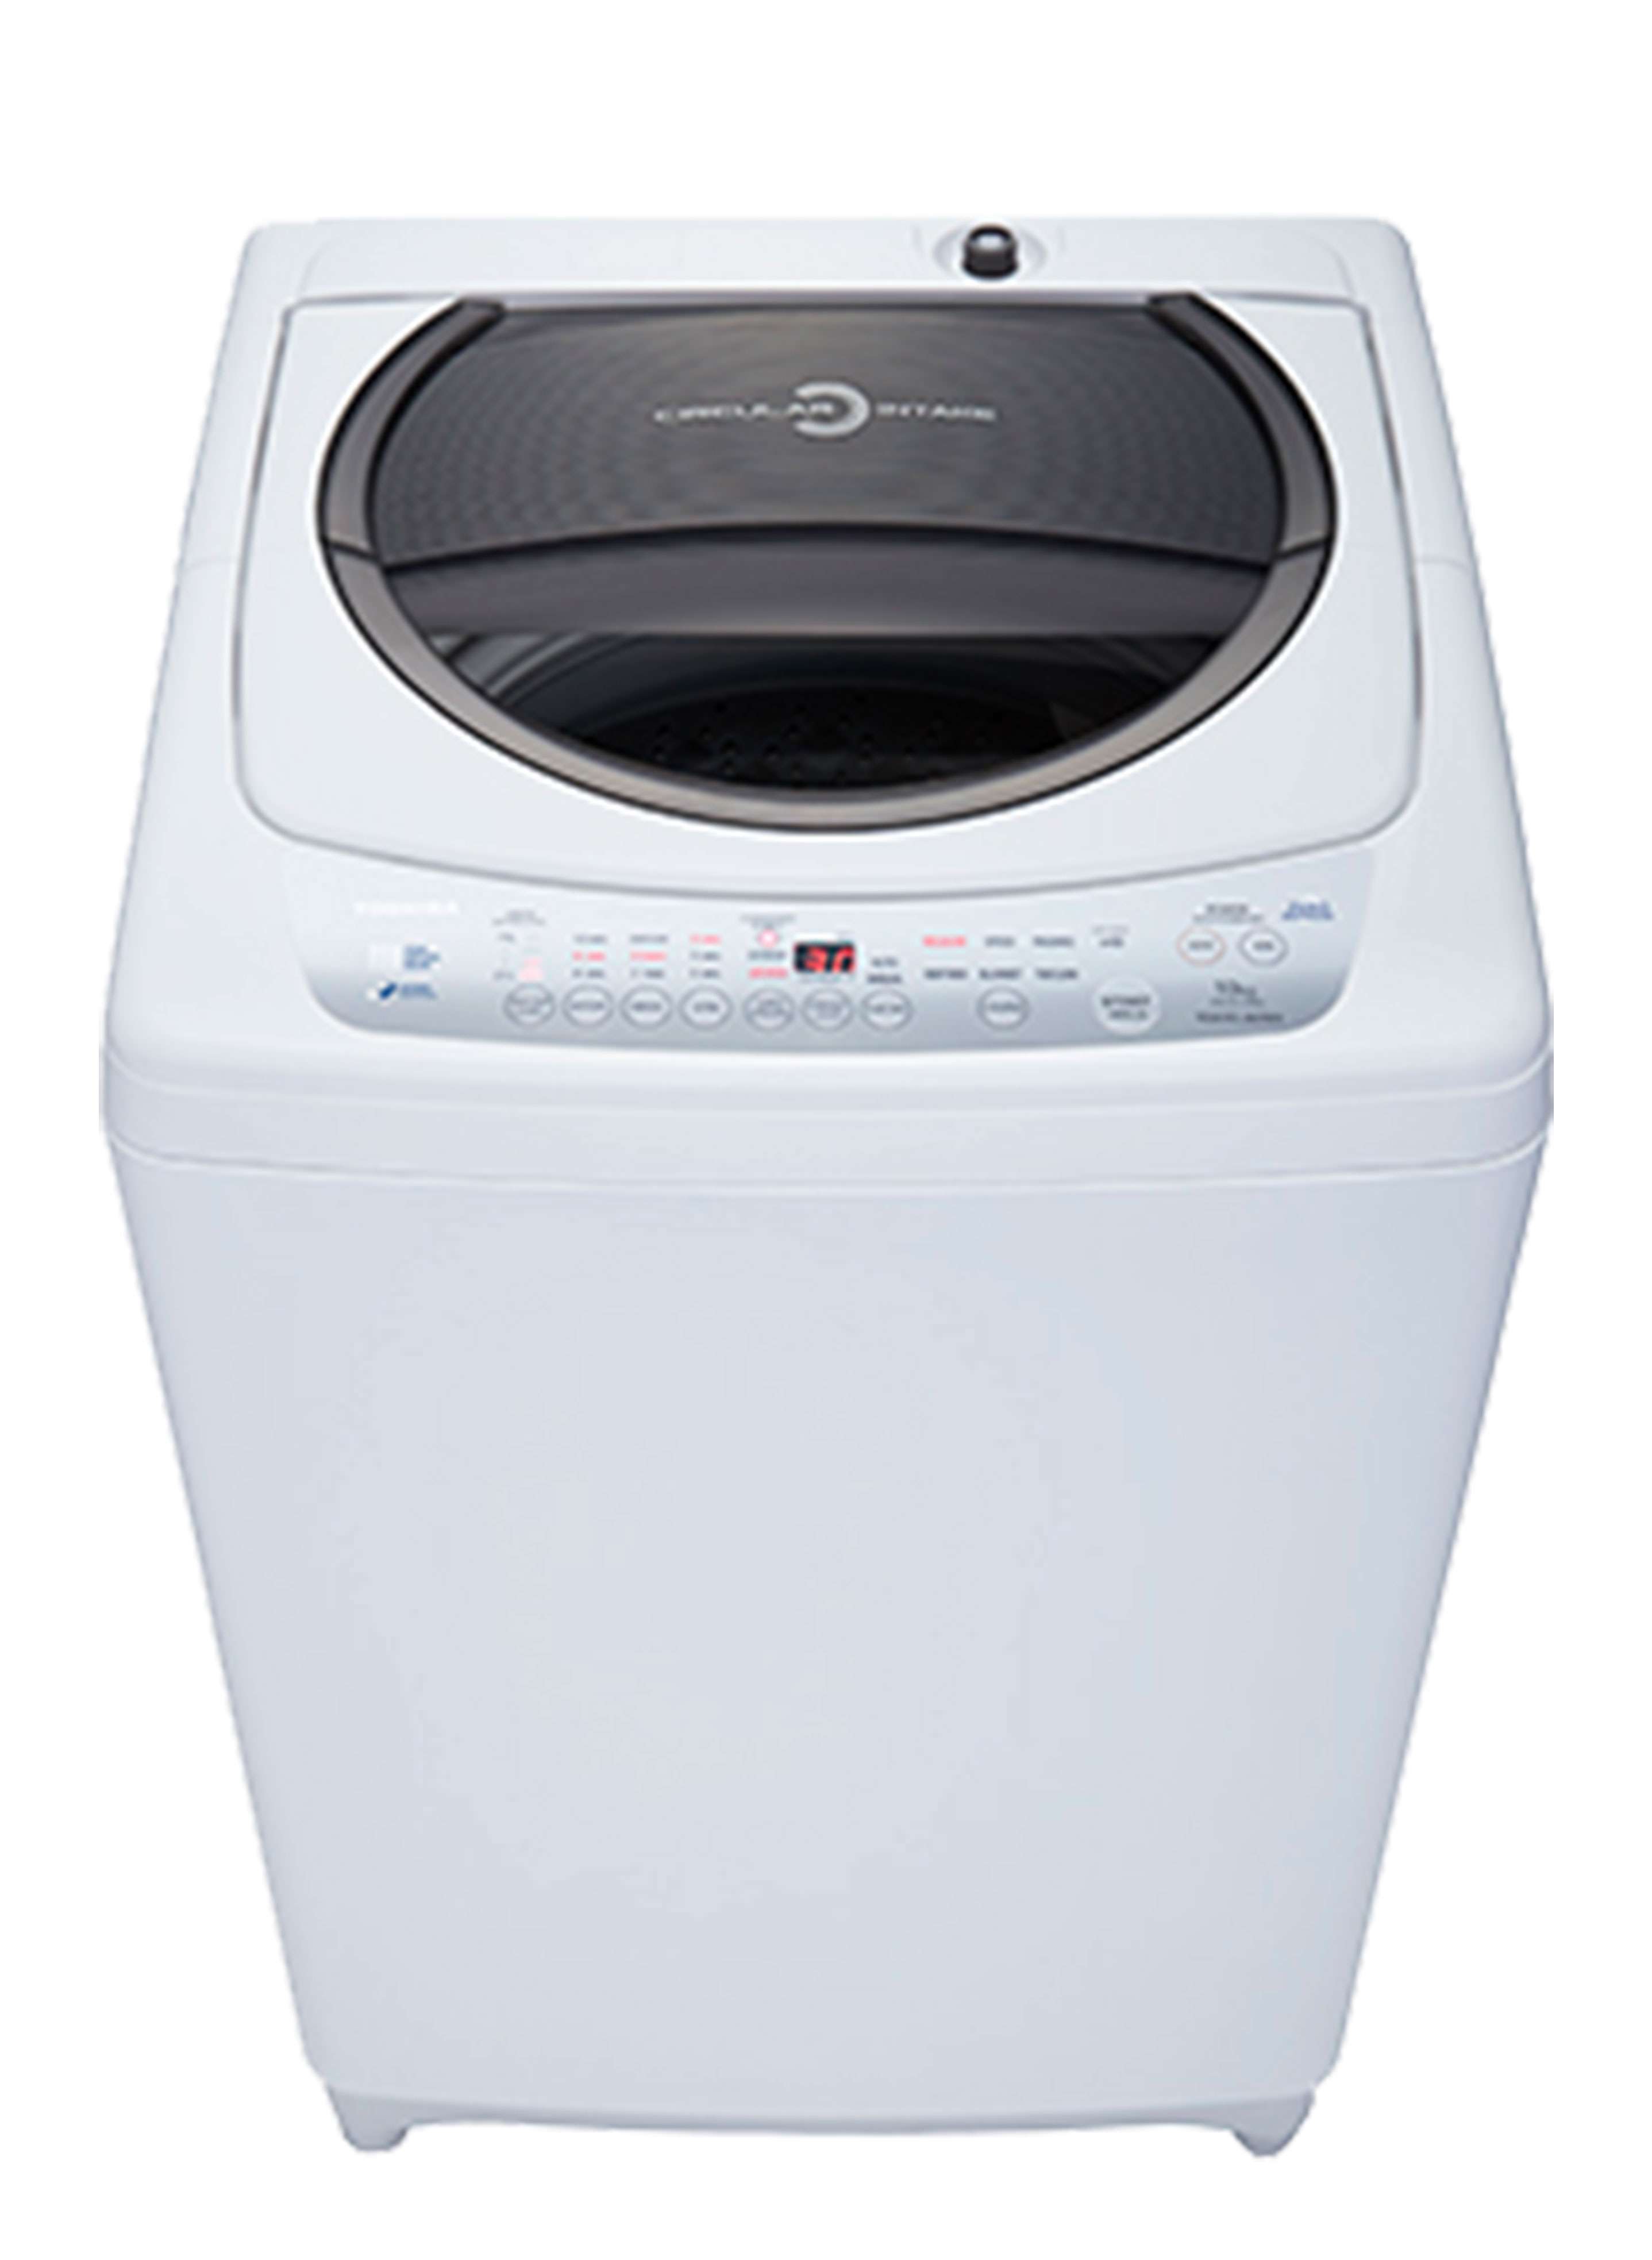 10 KG Top Load Washing Machine | Toshiba Middle East